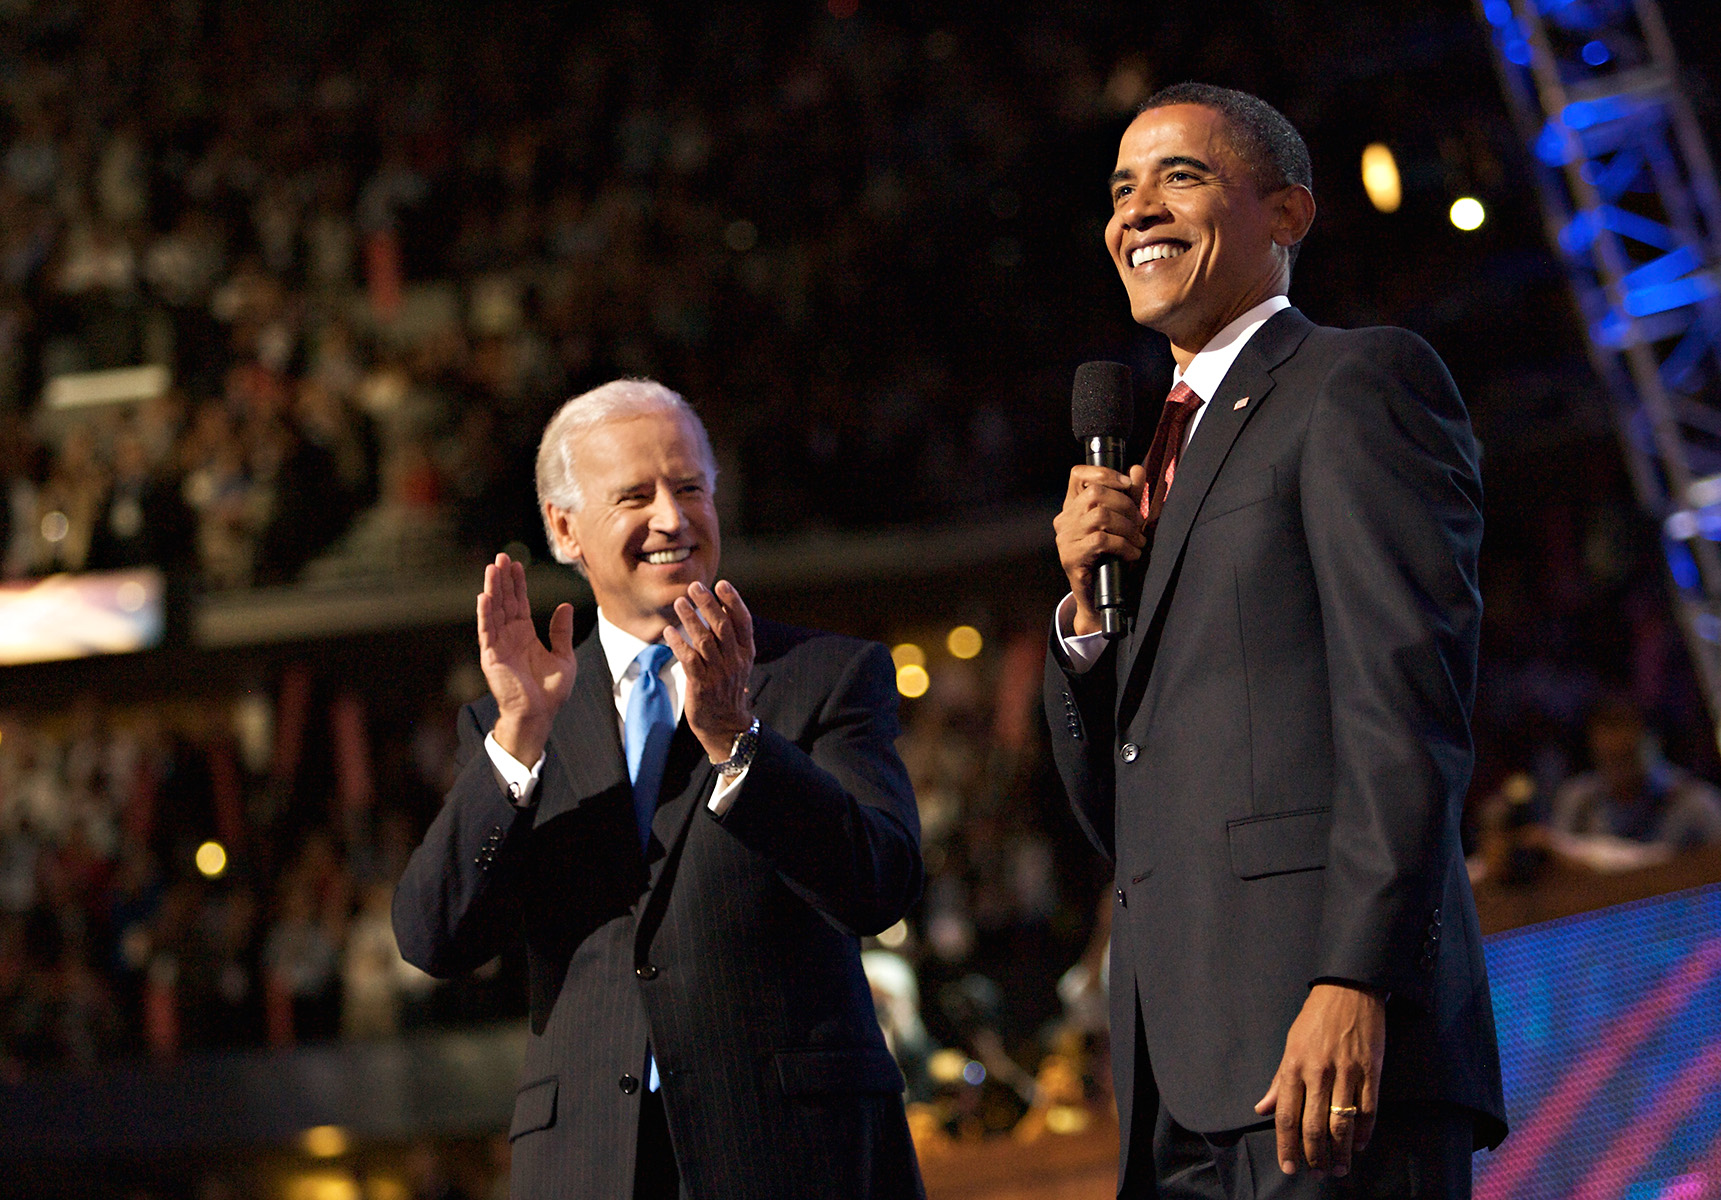 Barack Obama surprises his choice for vice president, Joe Biden, with an appearance on stage at the Democratic National Convention.